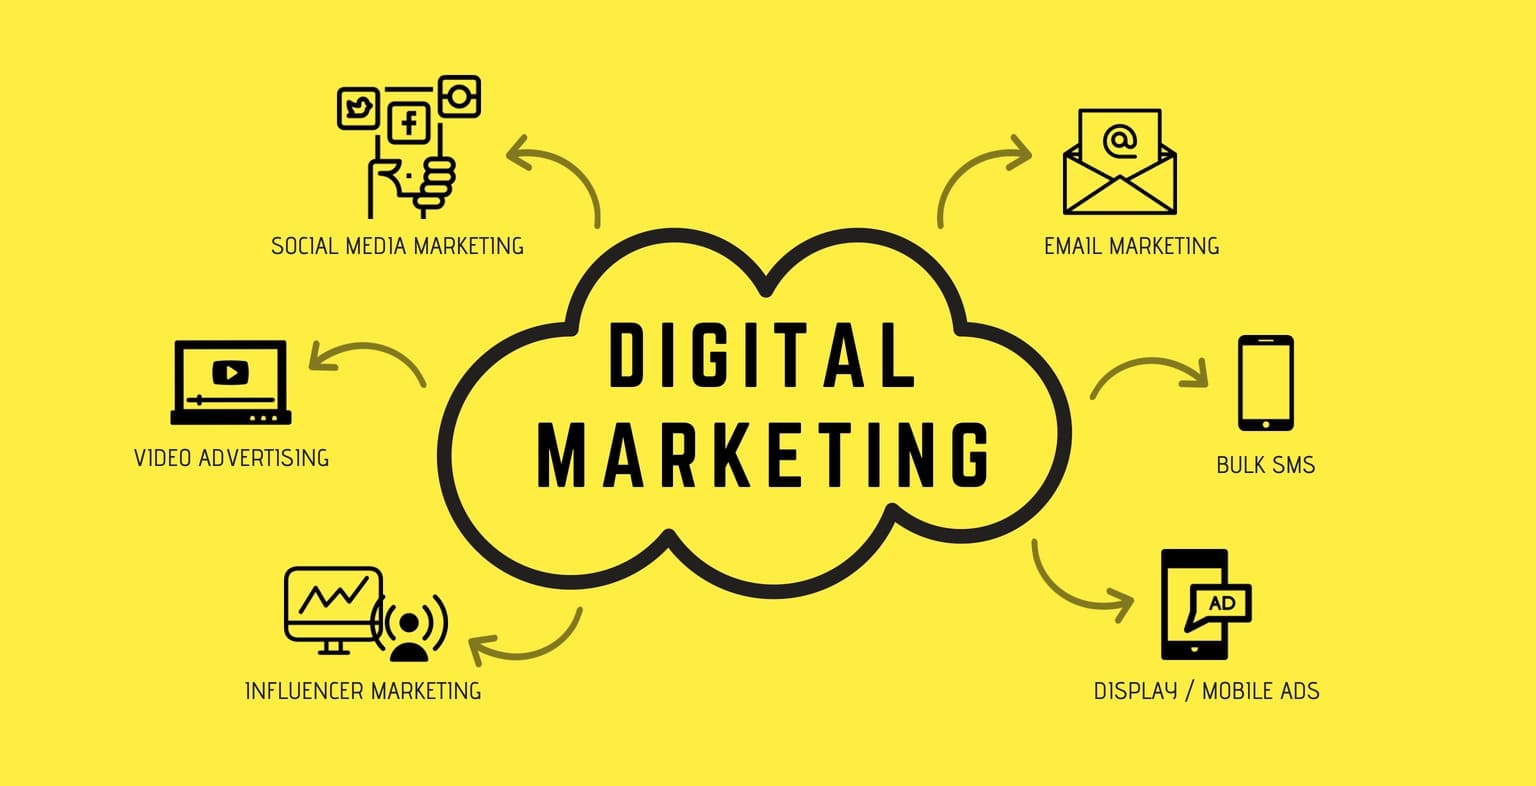 How to Promote Architects with Digital Marketing?